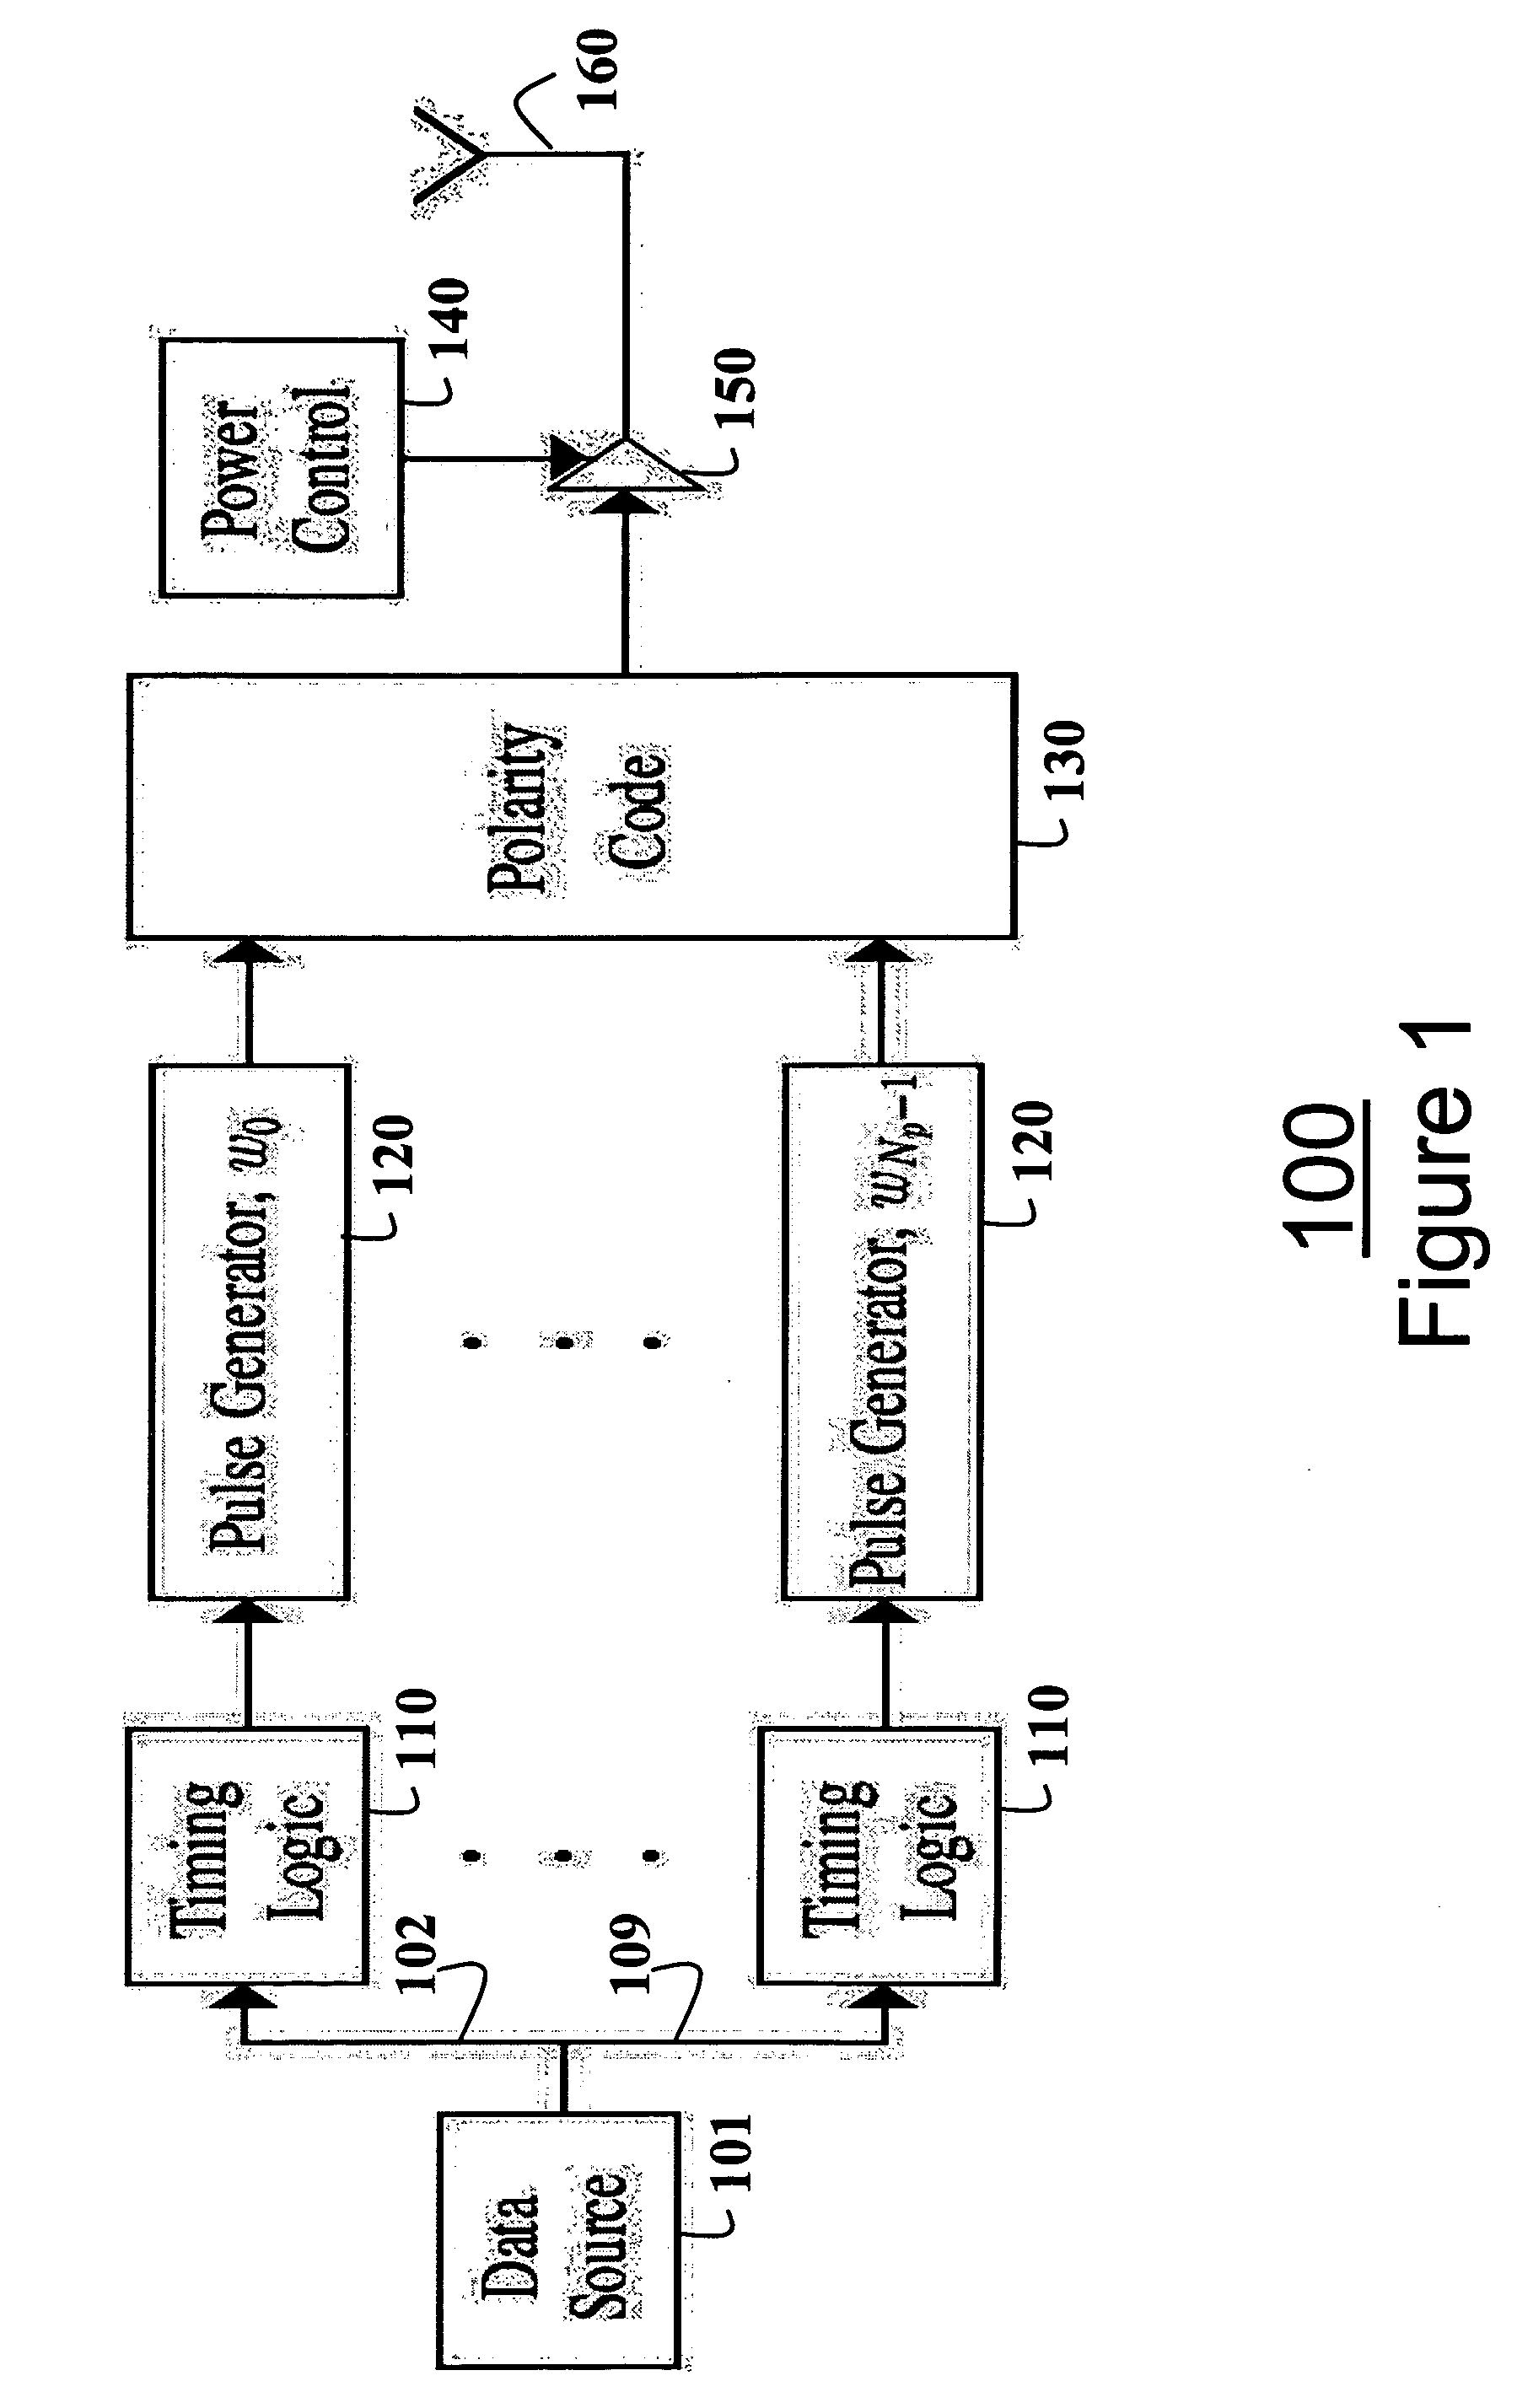 Impulse radio systems with multiple pulse types